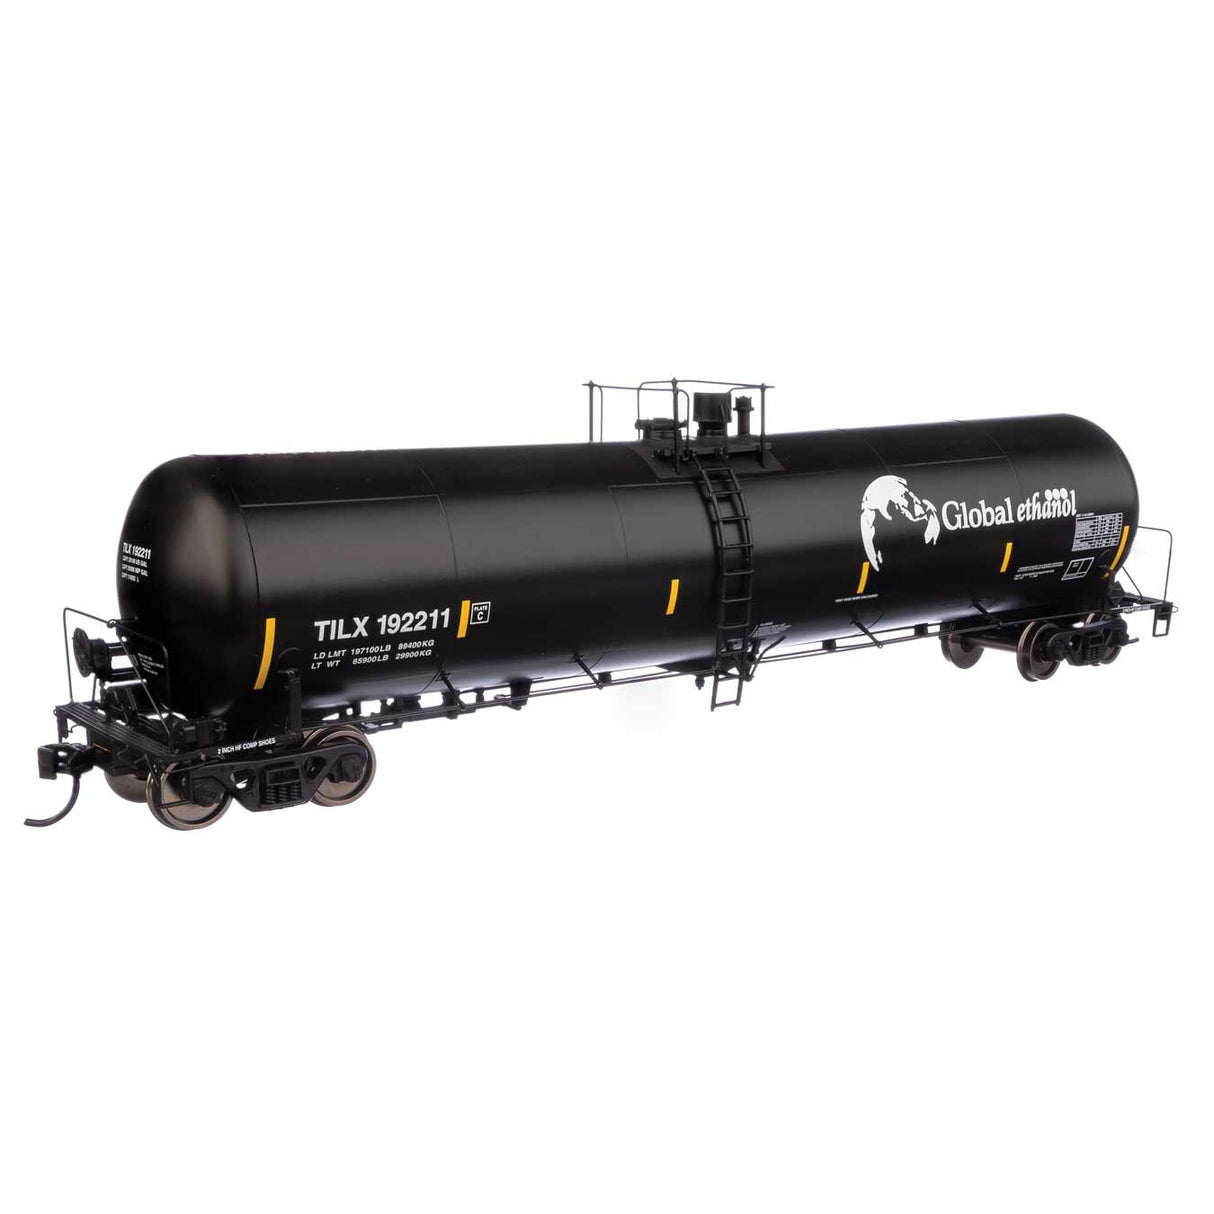 Walthers Proto 55' Trinity 30,145-Gallon Tank Car Global Ethanol TILX #192211 (black, white, yellow conspicuity marks)